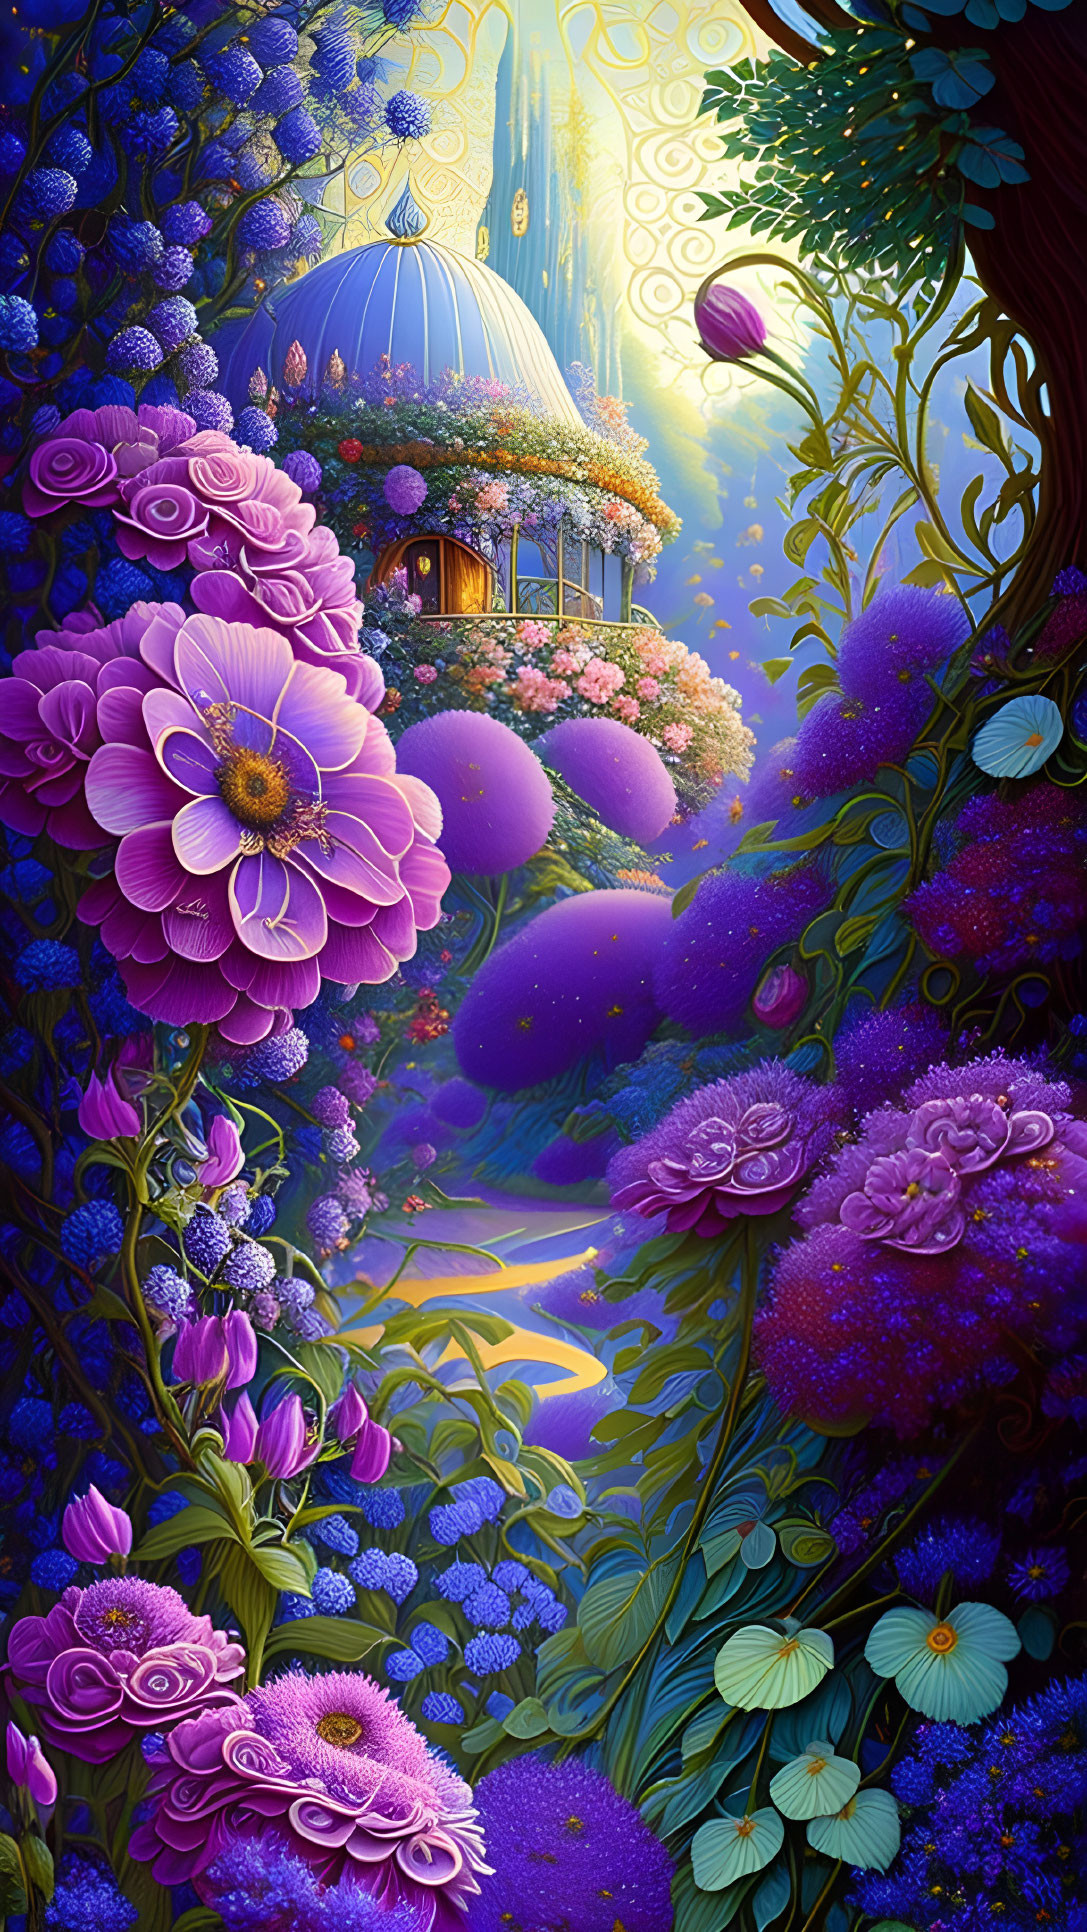 Whimsical purple and blue fantasy landscape with oversized flowers and lantern-lit treehouse